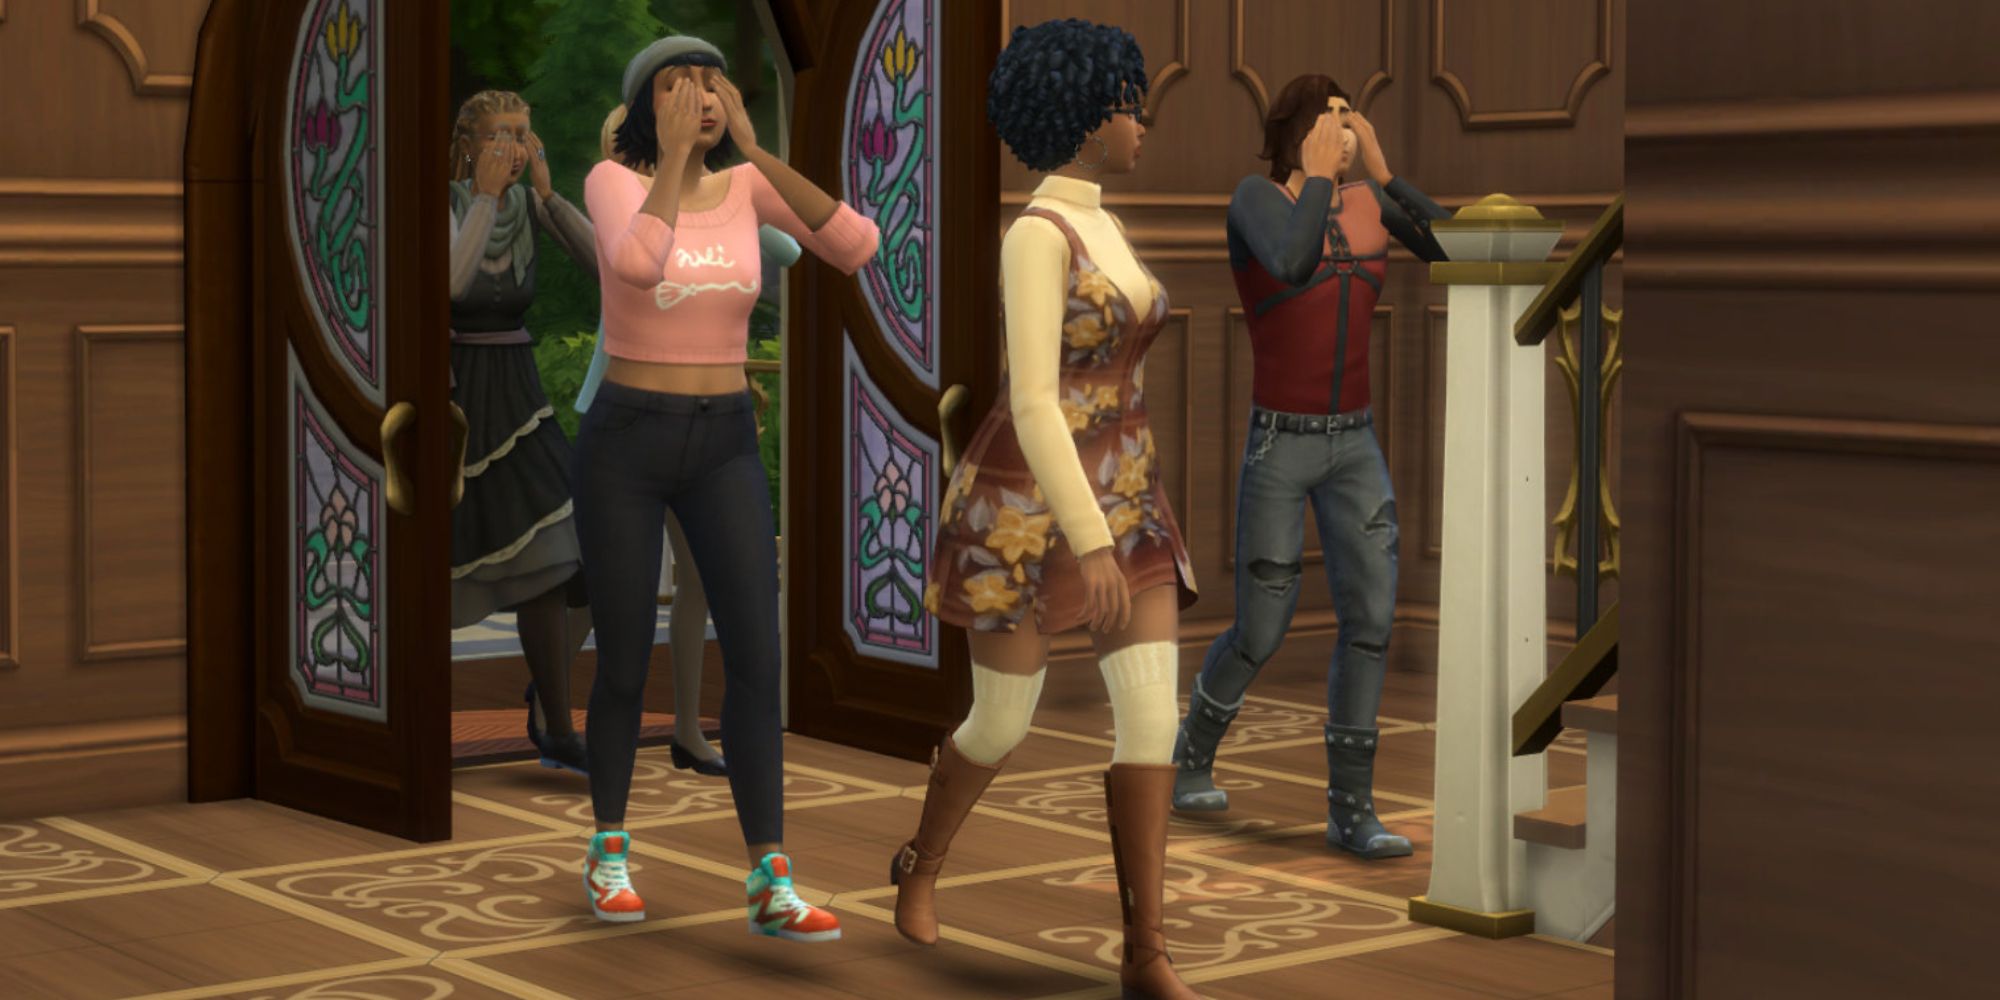 Sims 4 decorator career reveal as sims enter the door with eyes covered